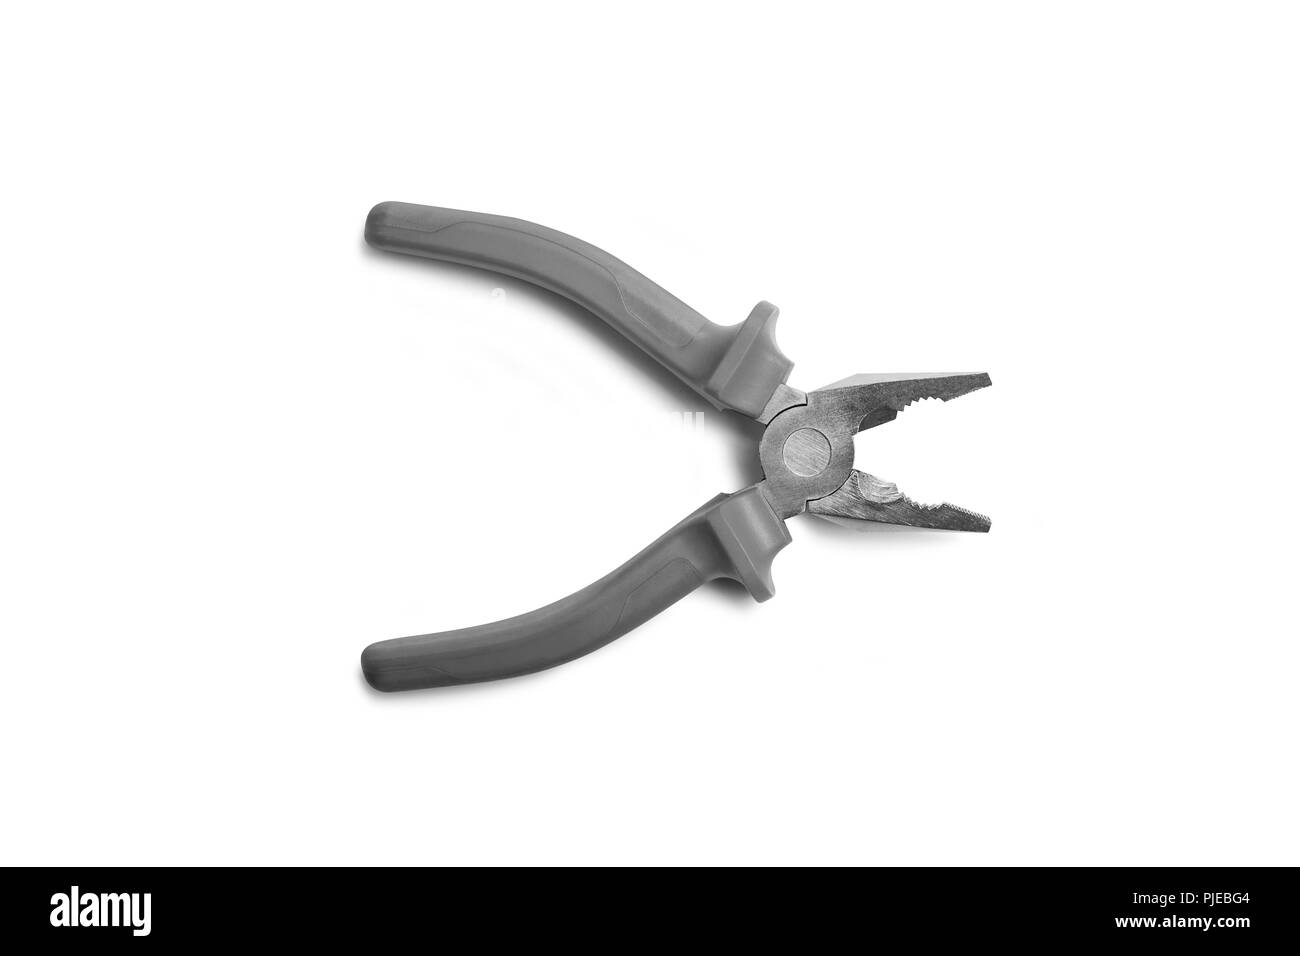 Pliers tools gray color isolated on white Stock Photo